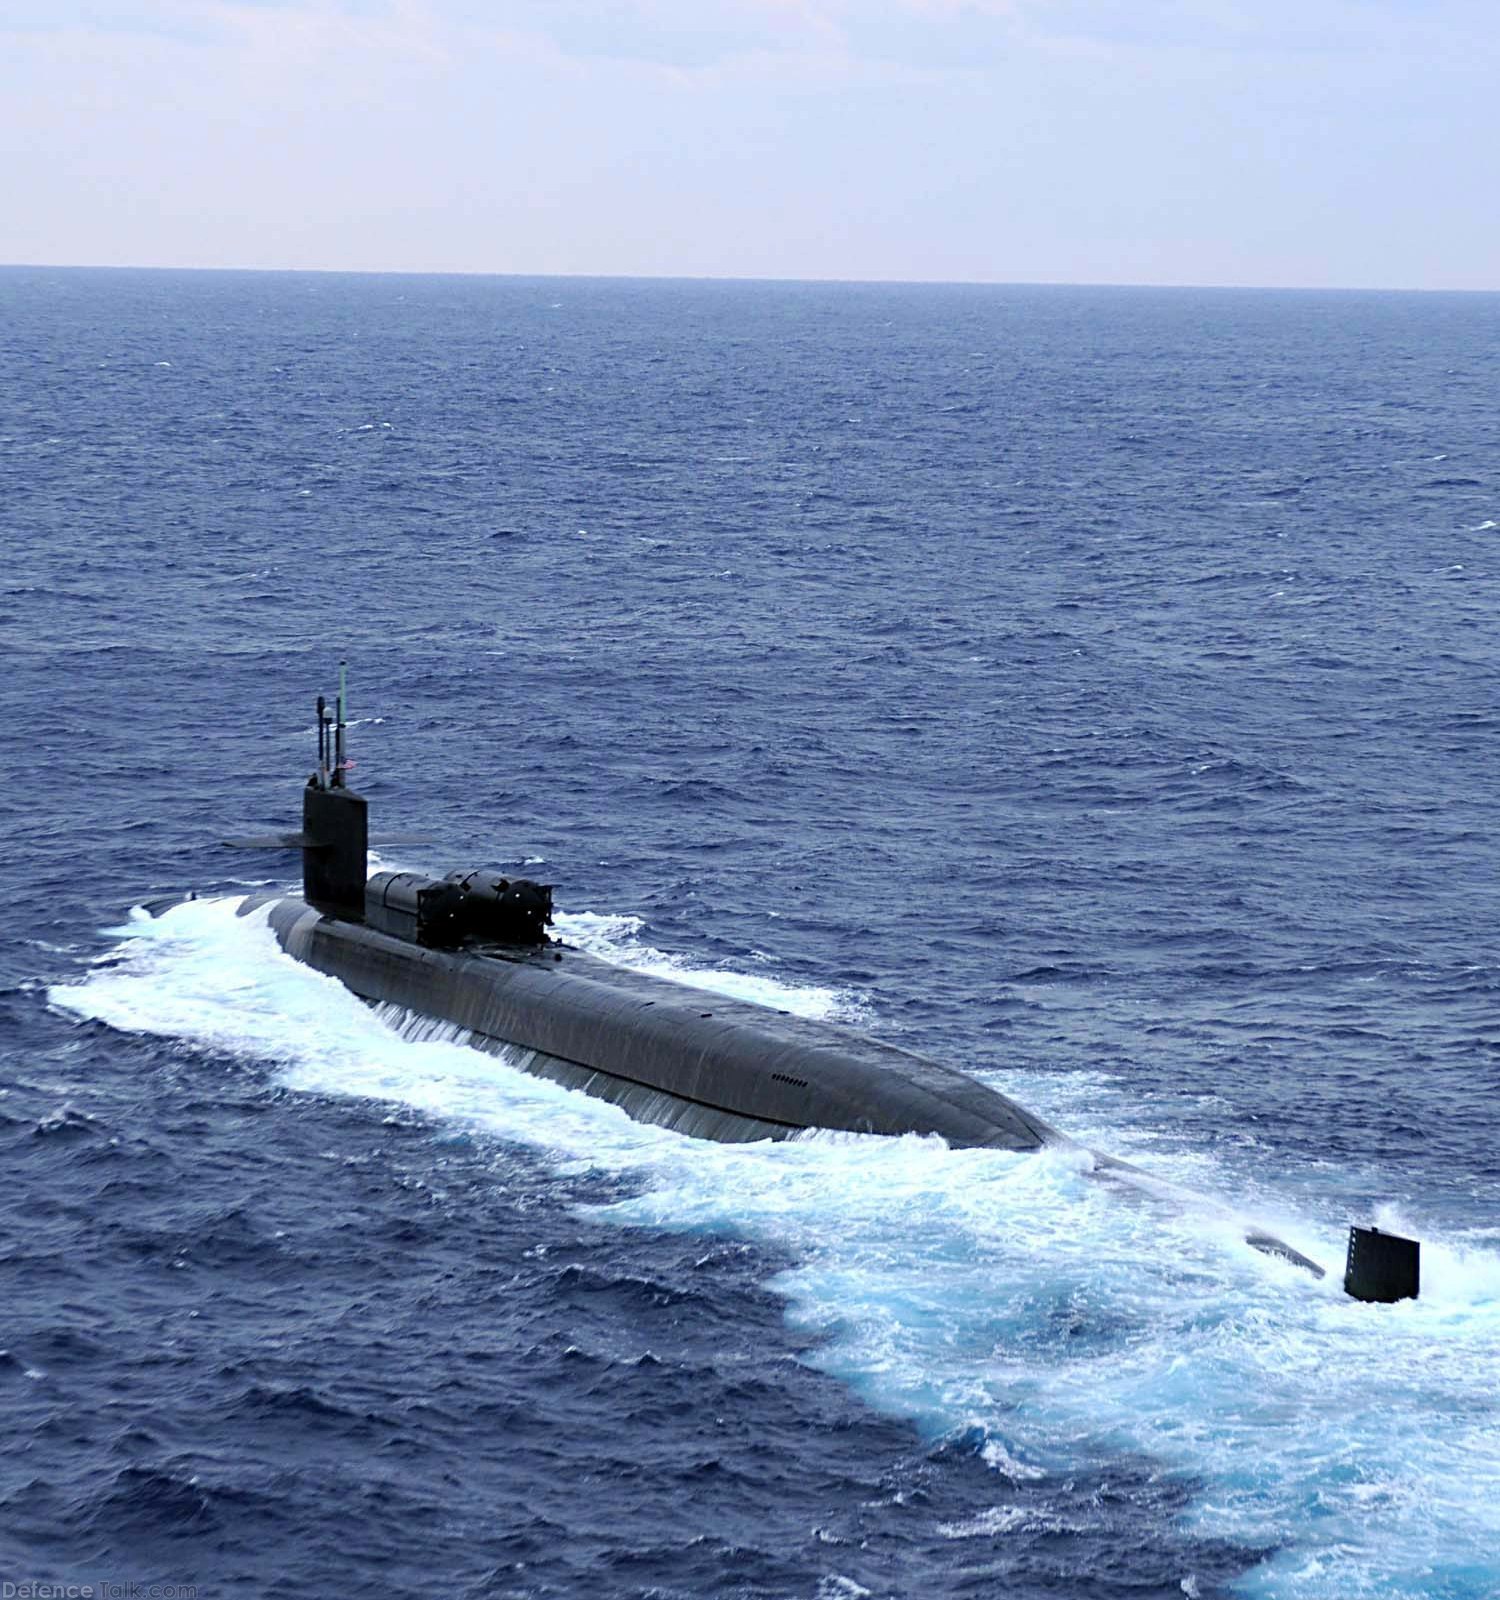 USS Ohio SSGN 726 Guided-Missile Submarine